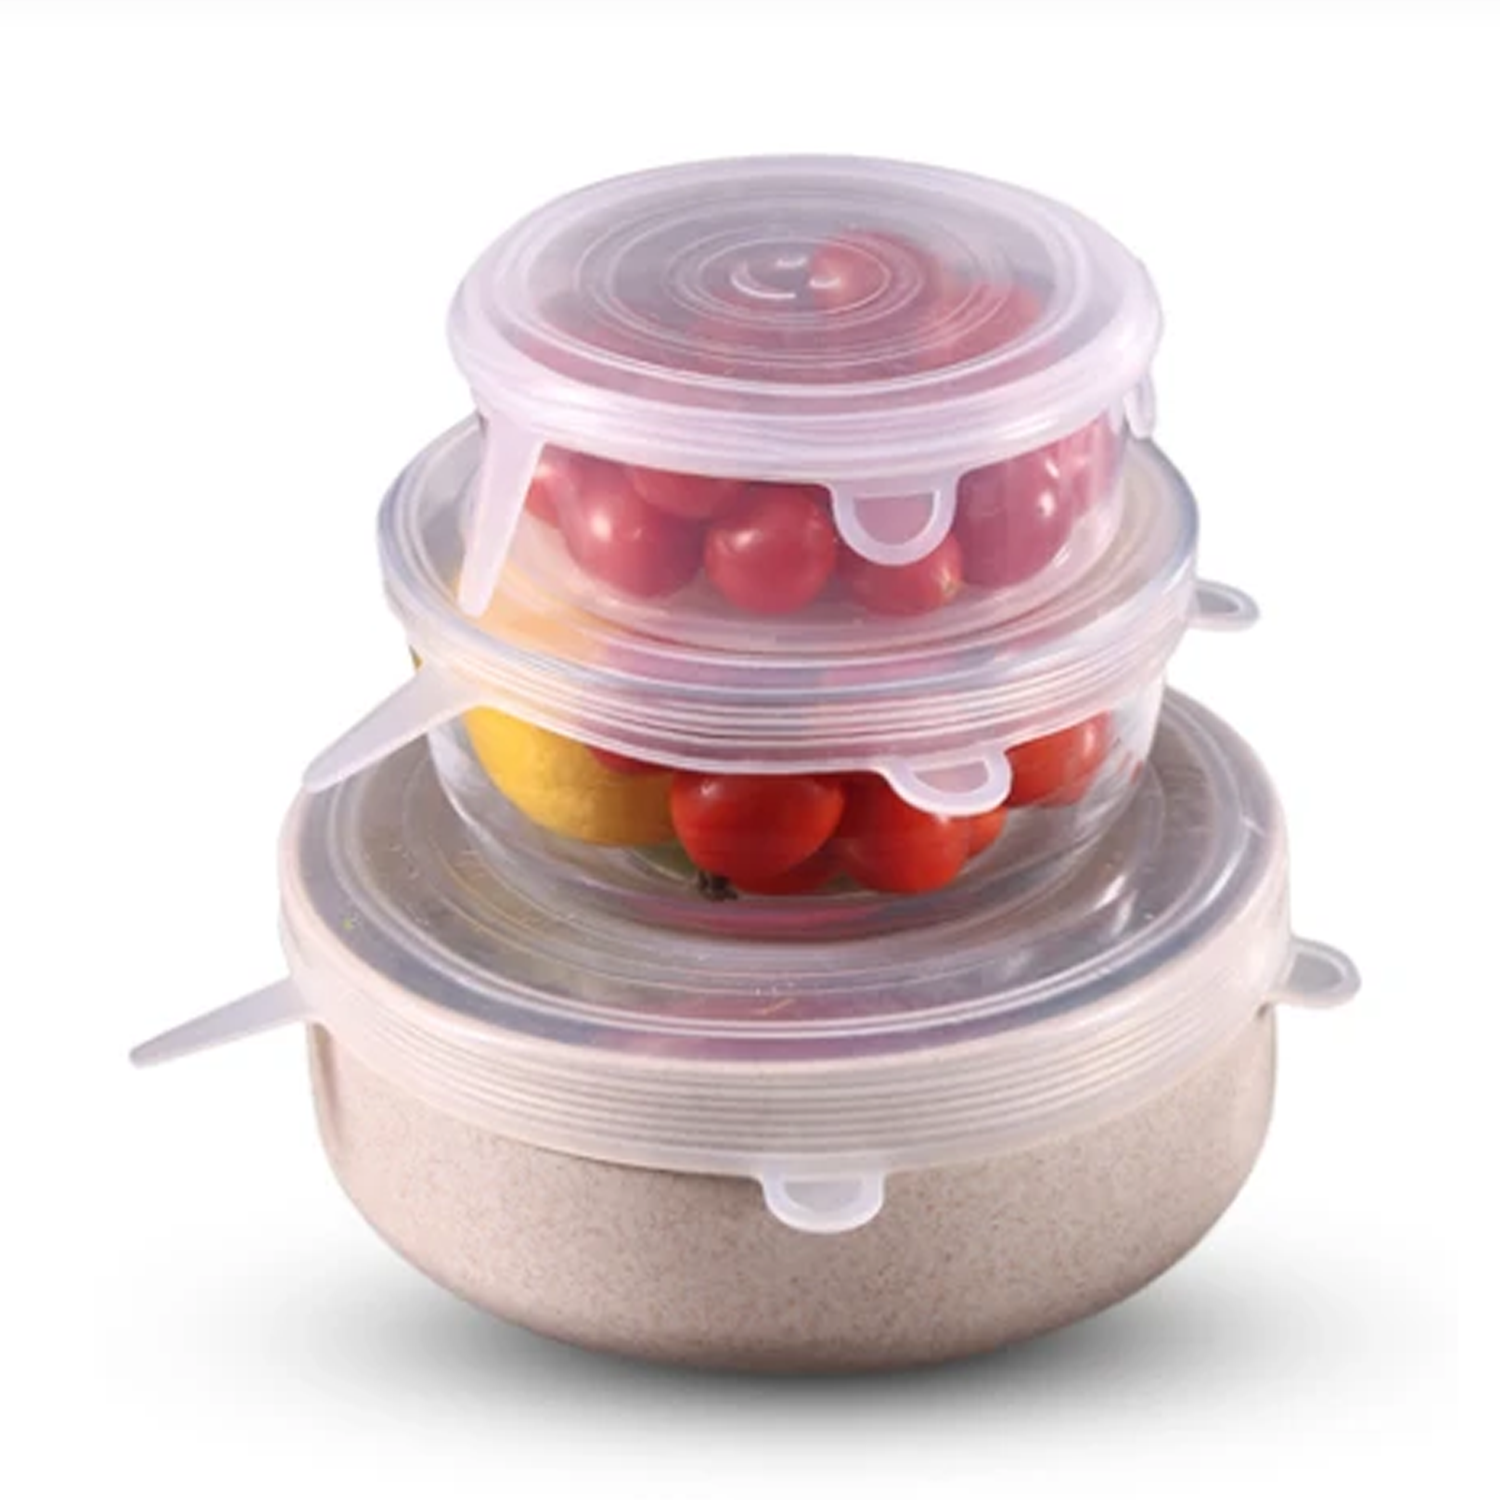 Silicone Food Lid (set of 6)